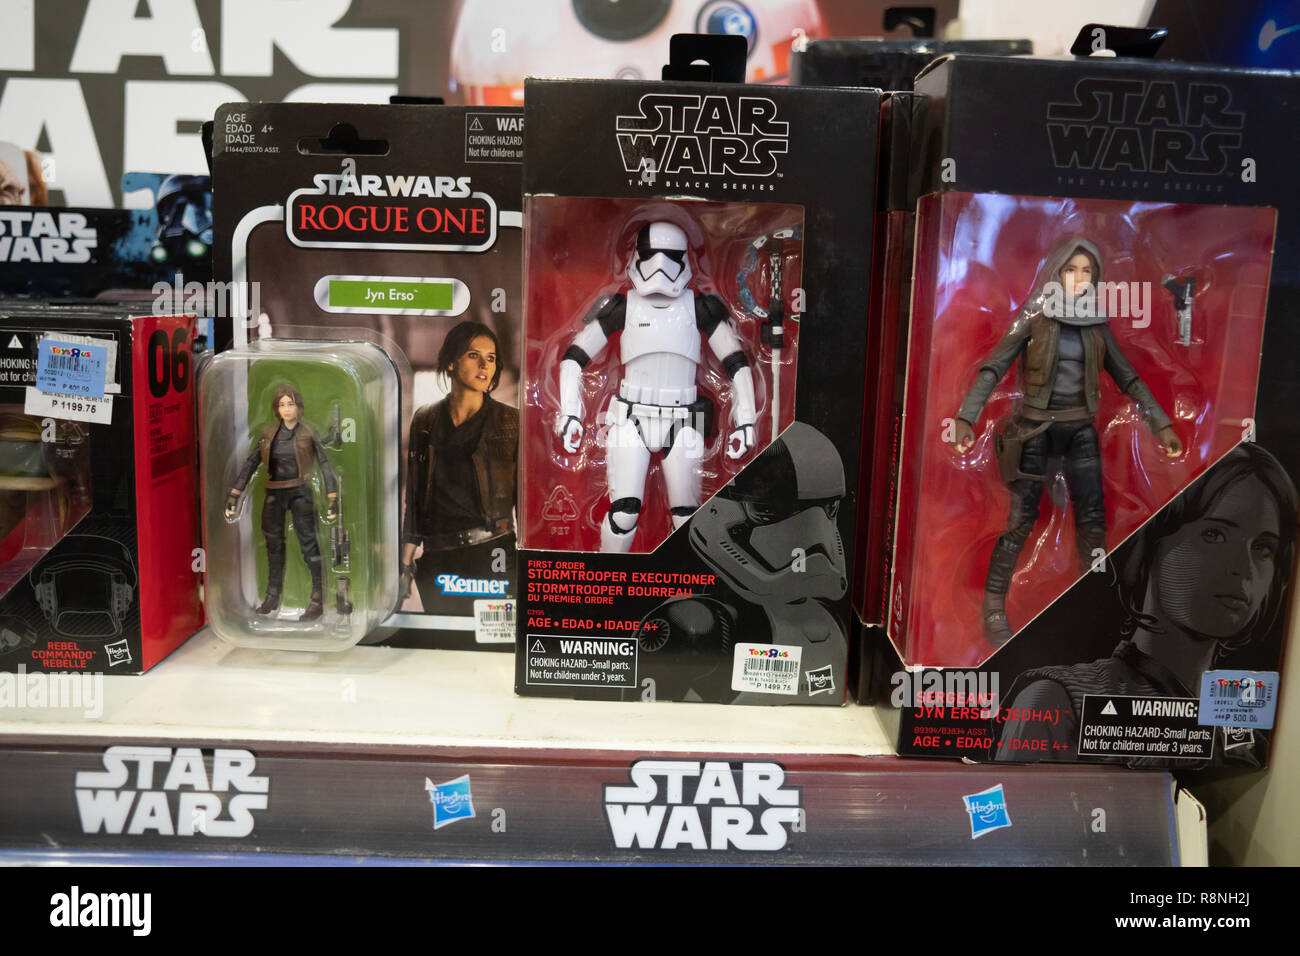 Star wars figures Jyn Erso & a Stormtrooper on sale a week before xmas 2018 at Toys R Us, Cebu City,Philippines Stock Photo